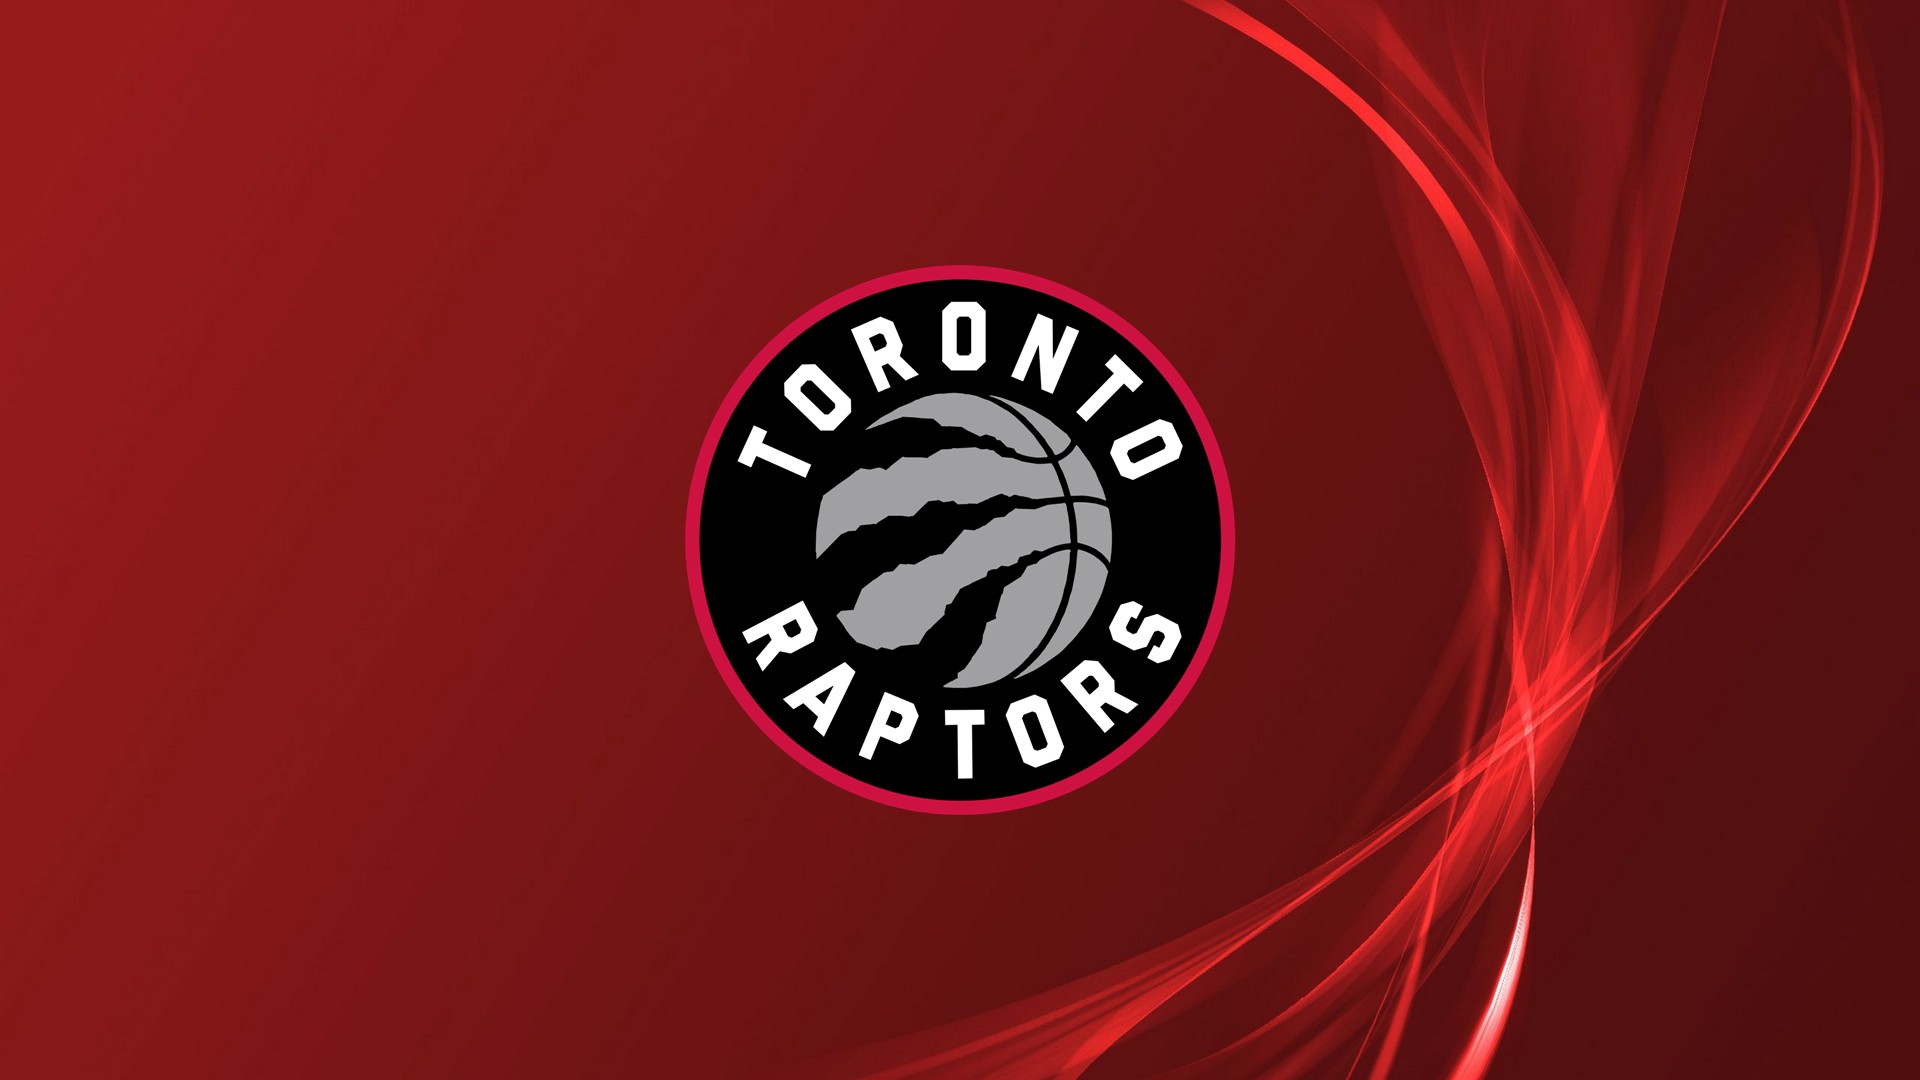 Toronto Raptors Logo Wallpaper with high-resolution 1920x1080 pixel. You can use this wallpaper for your Desktop Computer Backgrounds, Windows or Mac Screensavers, iPhone Lock screen, Tablet or Android and another Mobile Phone device